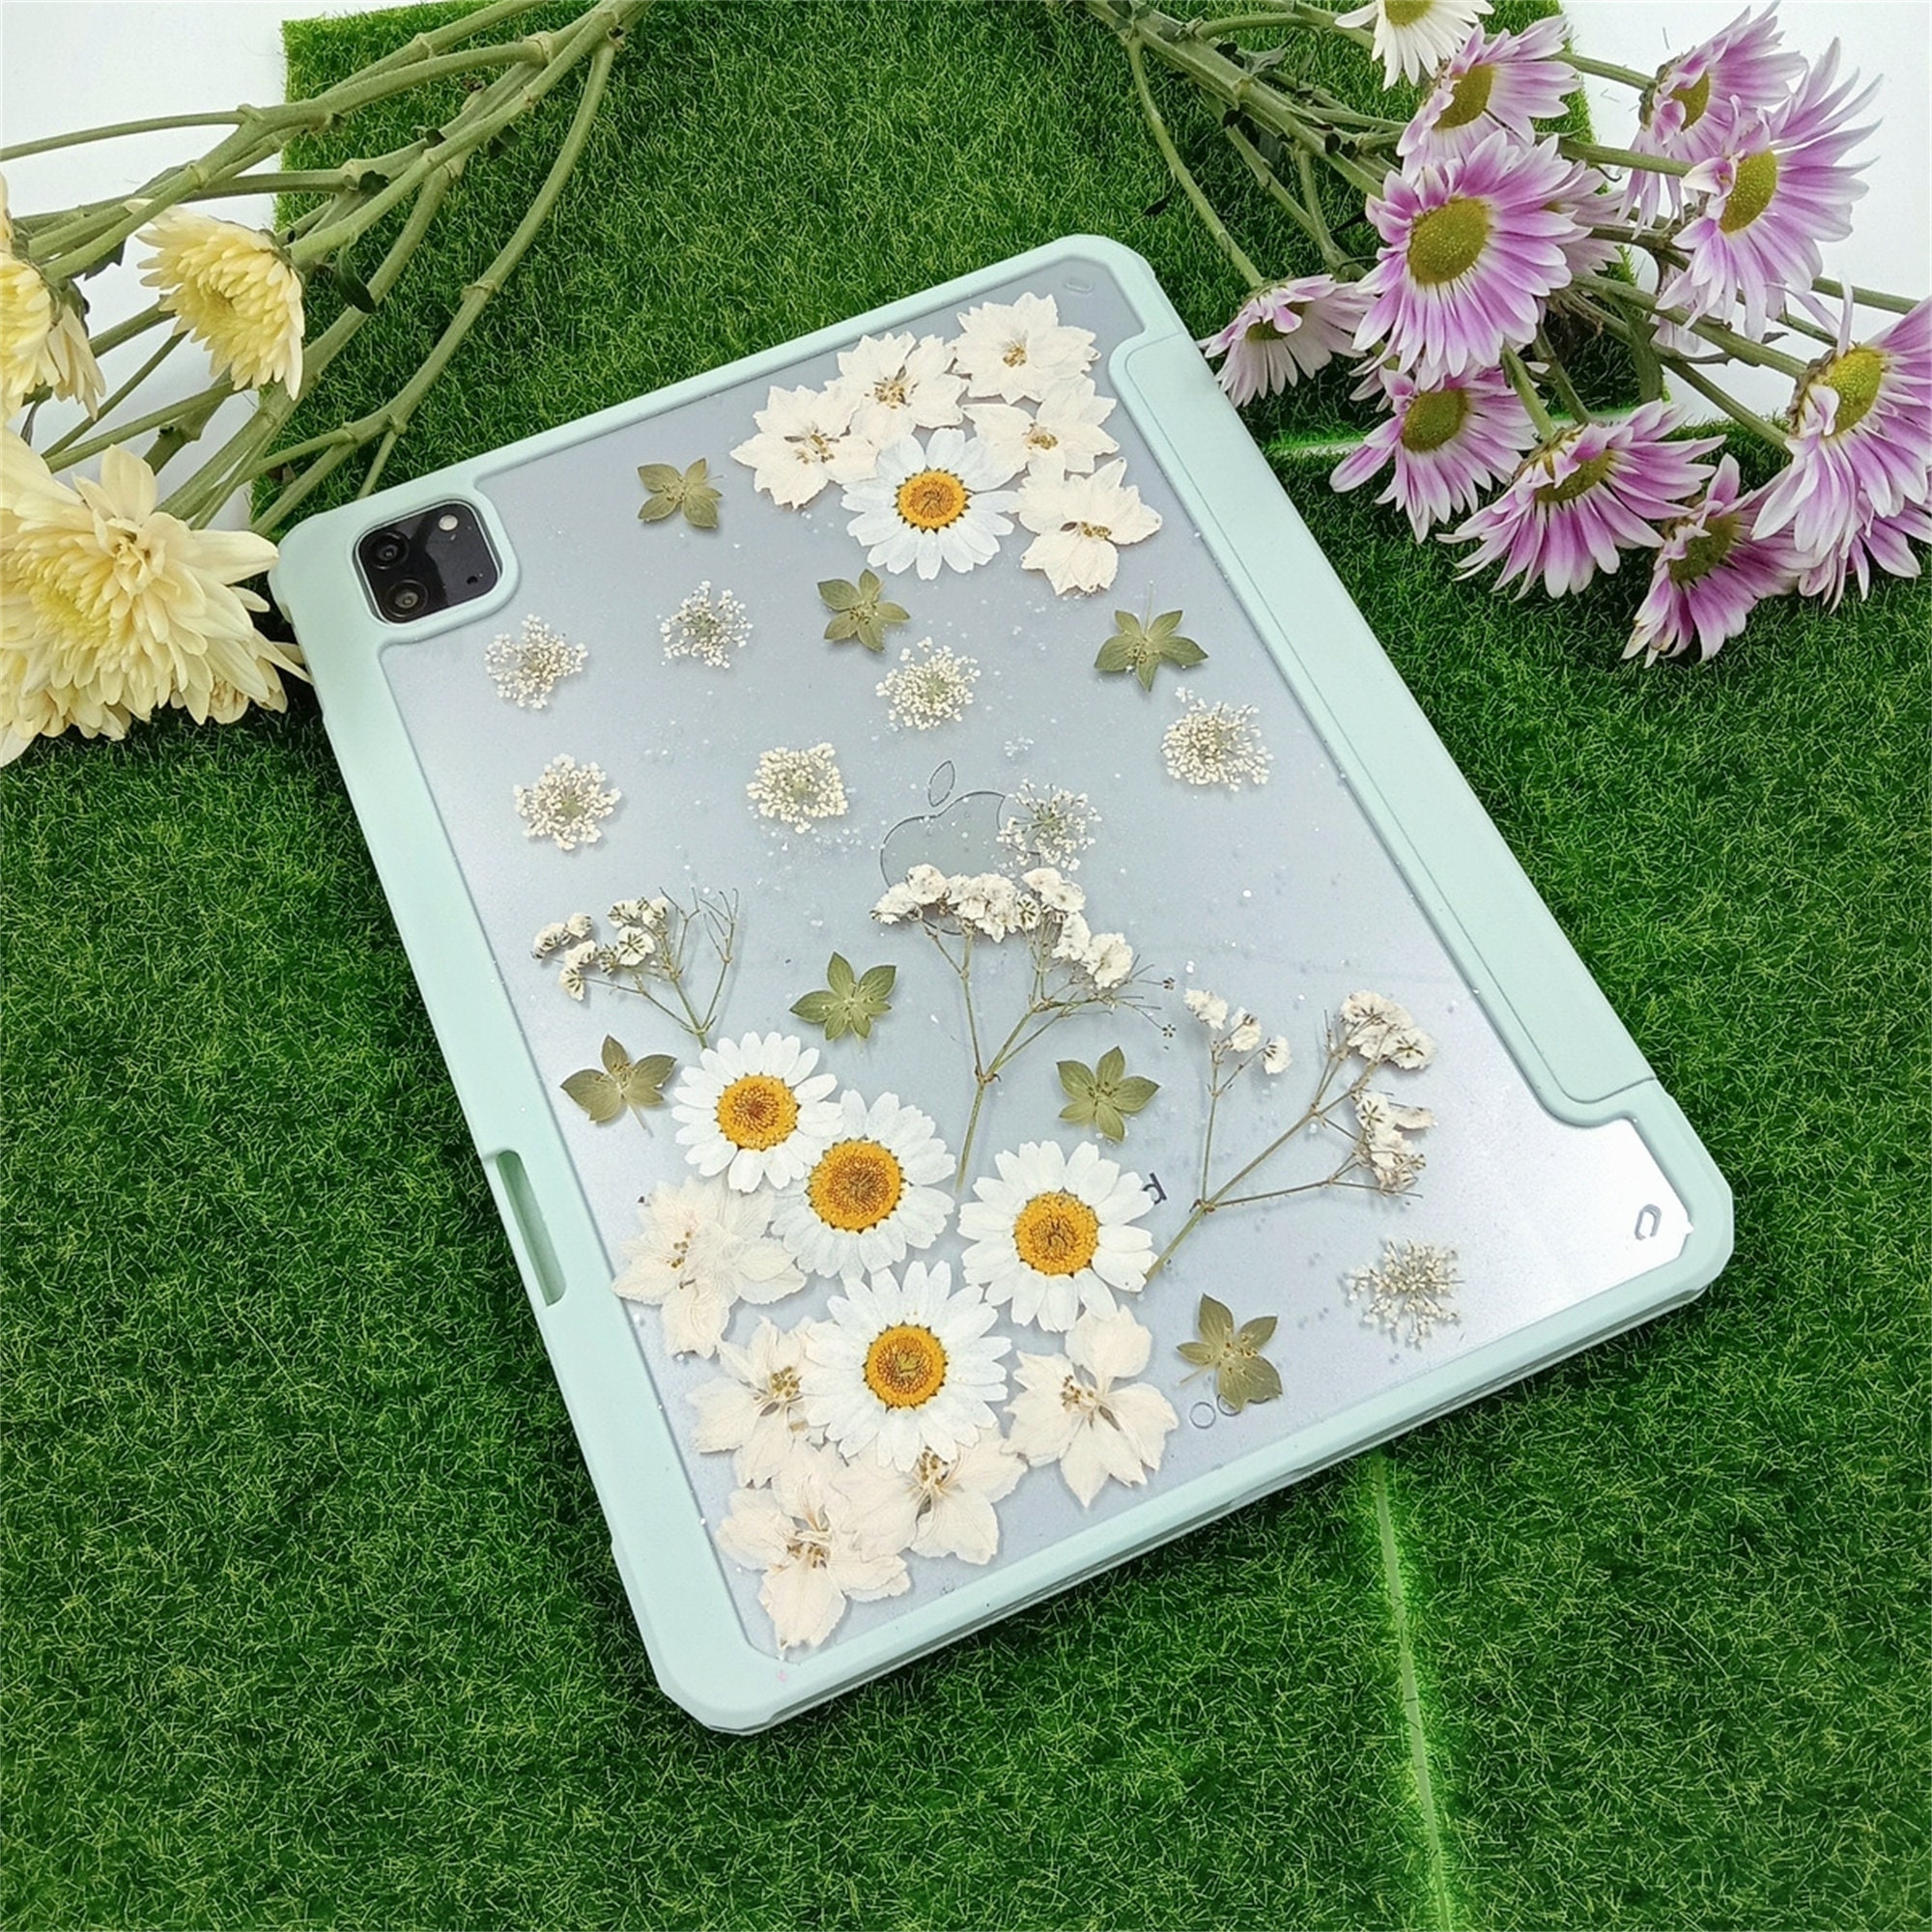 Rock, Love, Peace, Etc with yellow and green flower iPad Case